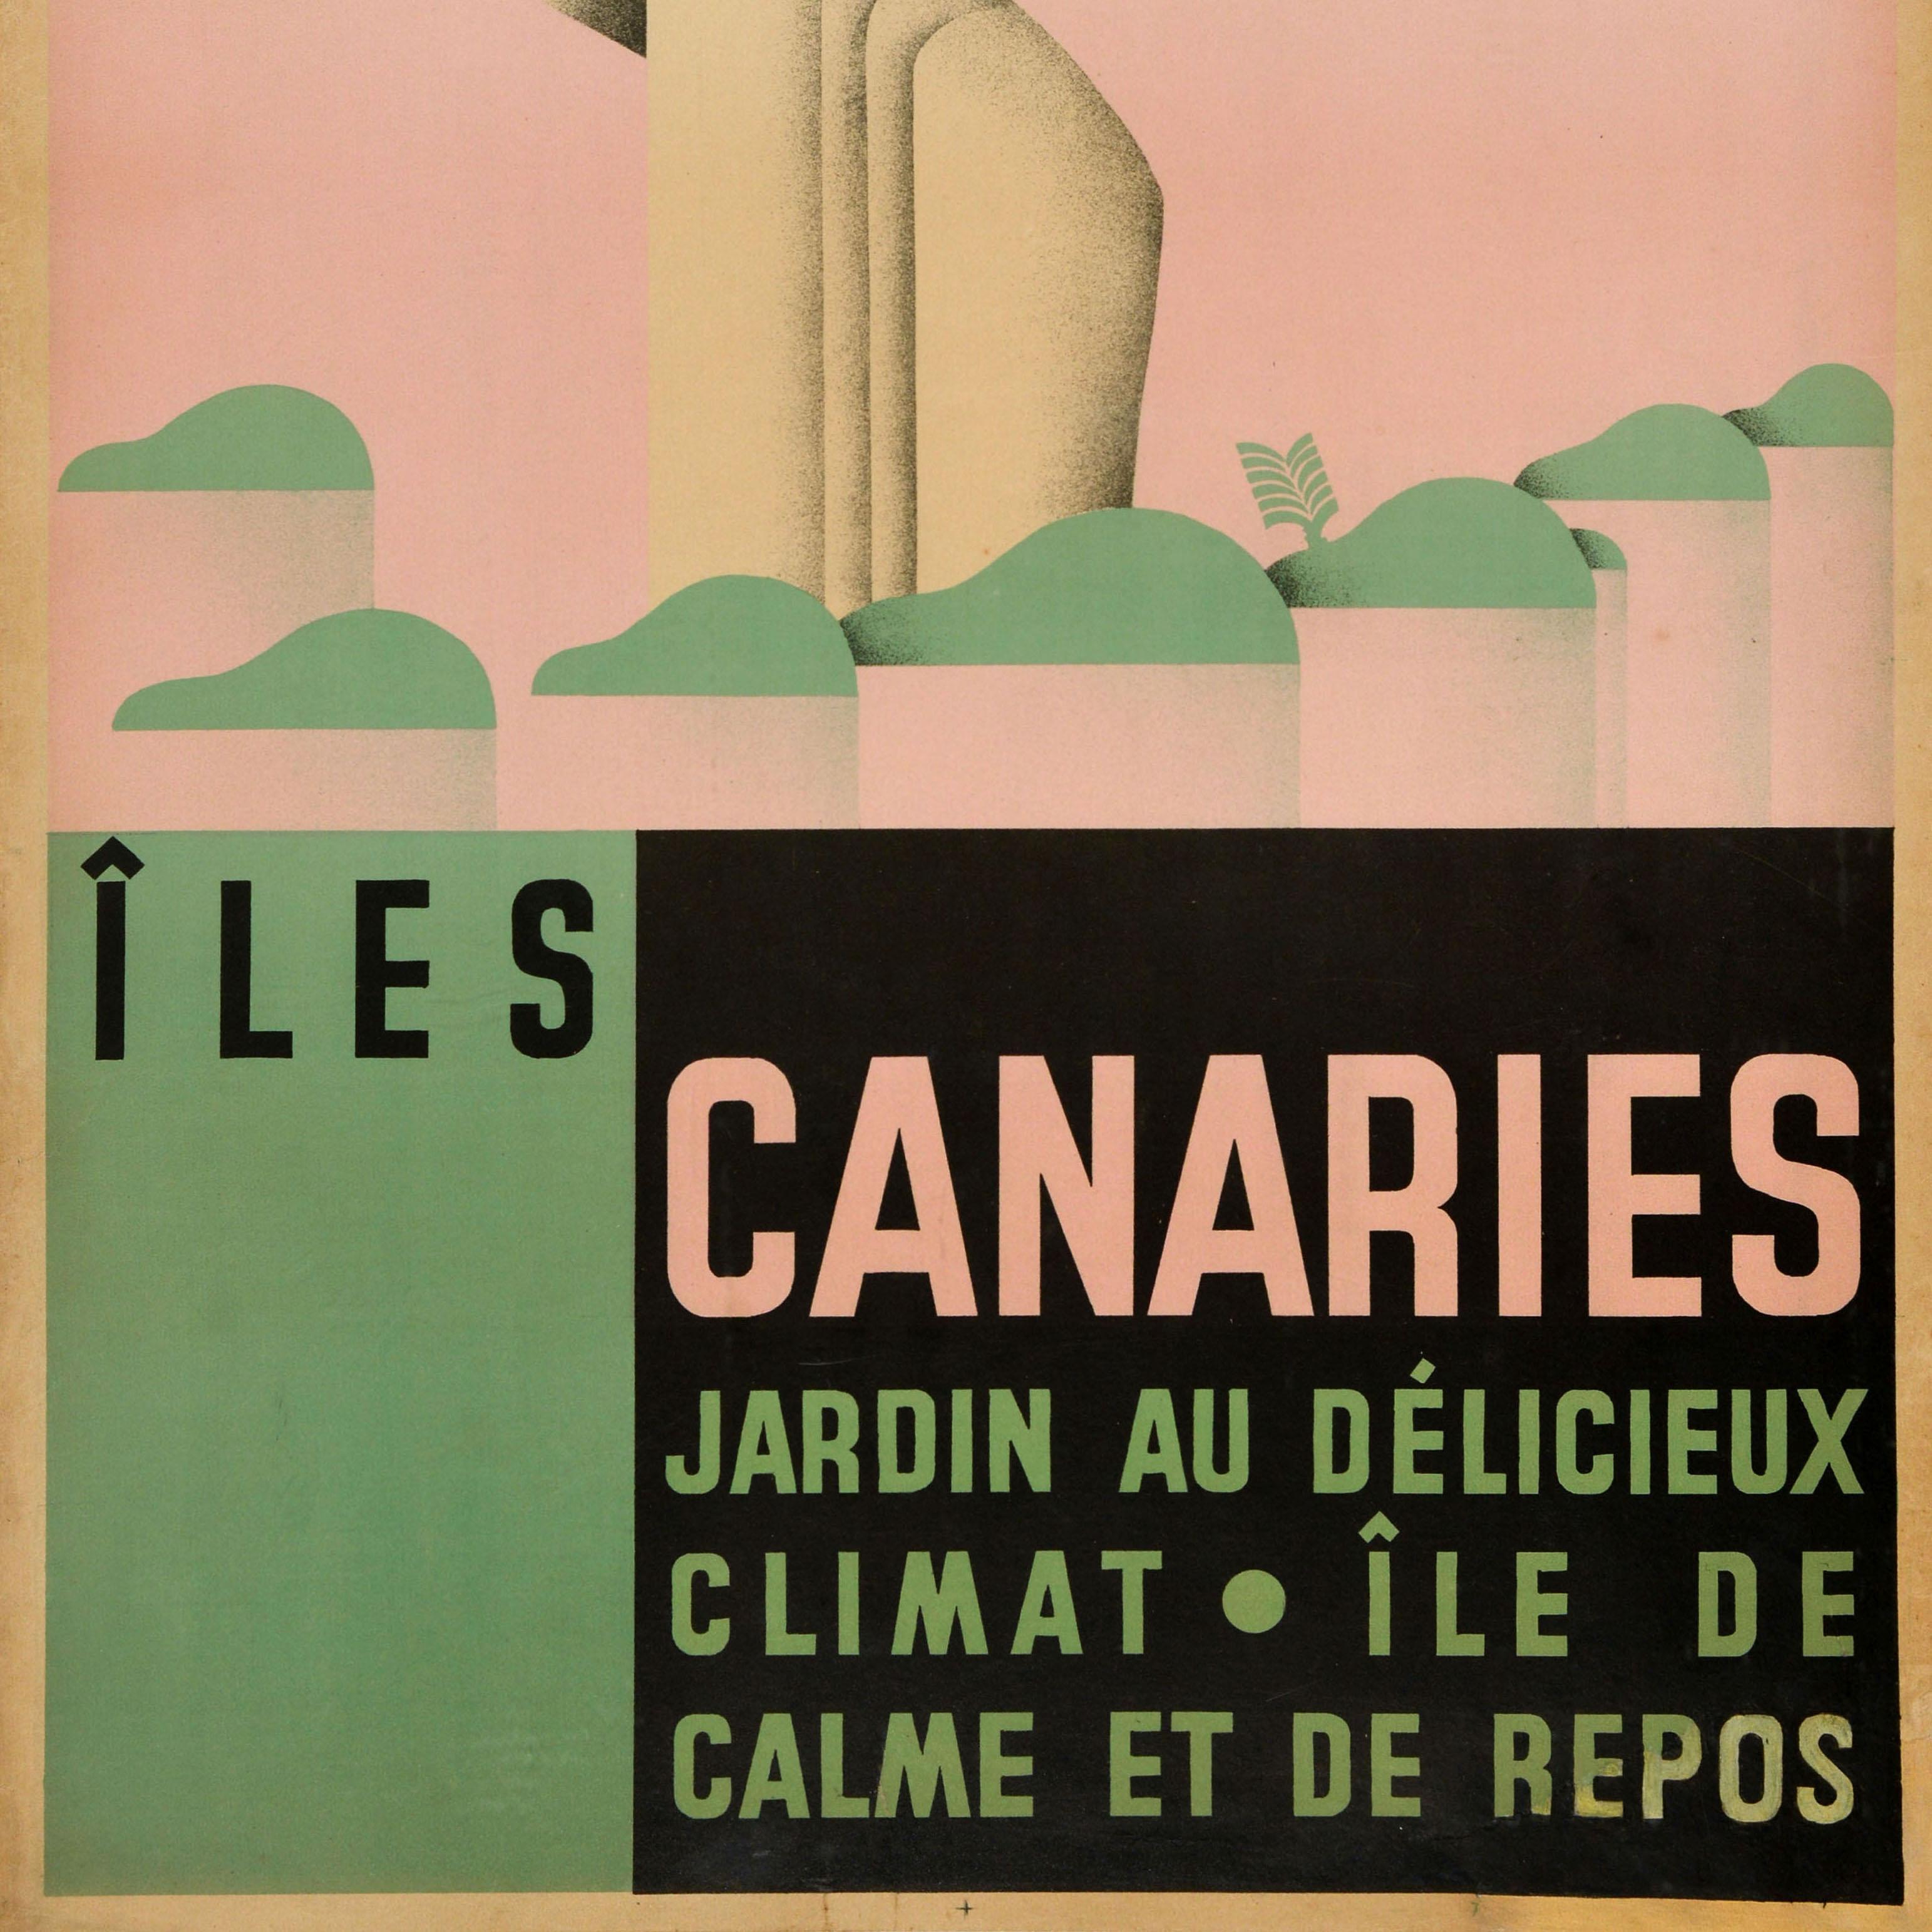 Original vintage travel poster for Canary Islands / Iles Canaries featuring a great design by Antonio Ares Moline (1907-1937) depicting a lady with islands at her feet set over a pink background, the caption reads - Canary Islands garden with